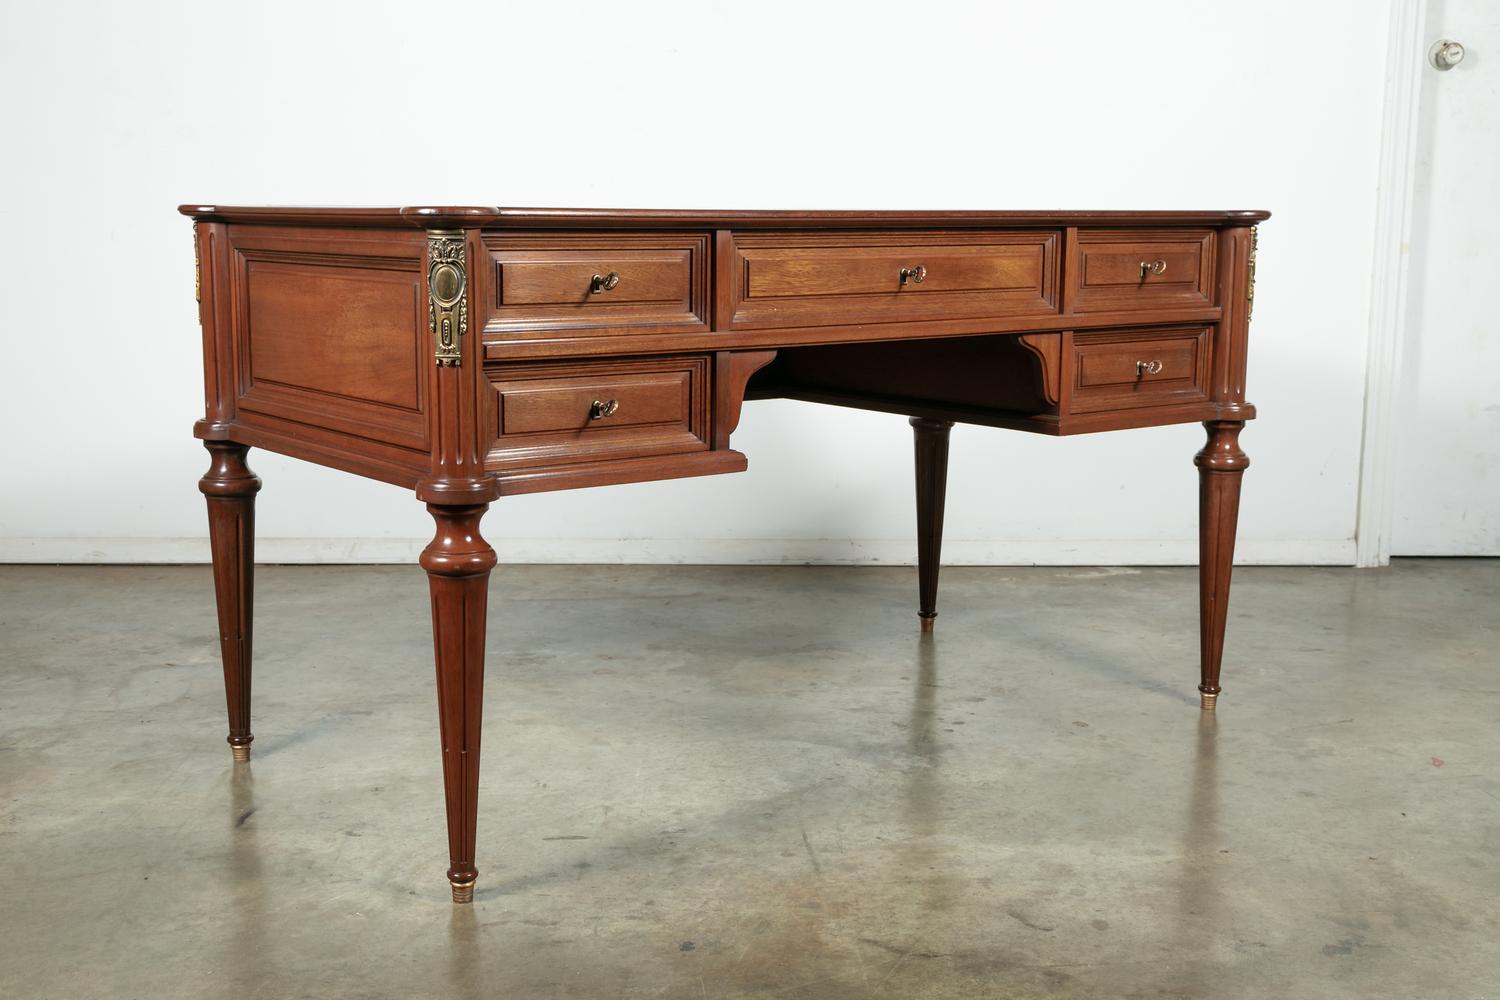 French Louis XVI style mahogany bureau plat or writing table with a cookie cutter top having an attractive cognac leather writing surface with beautiful gilt tooling framing the edges and bronze ormolu mounts, circa 1940s. A single central drawer is